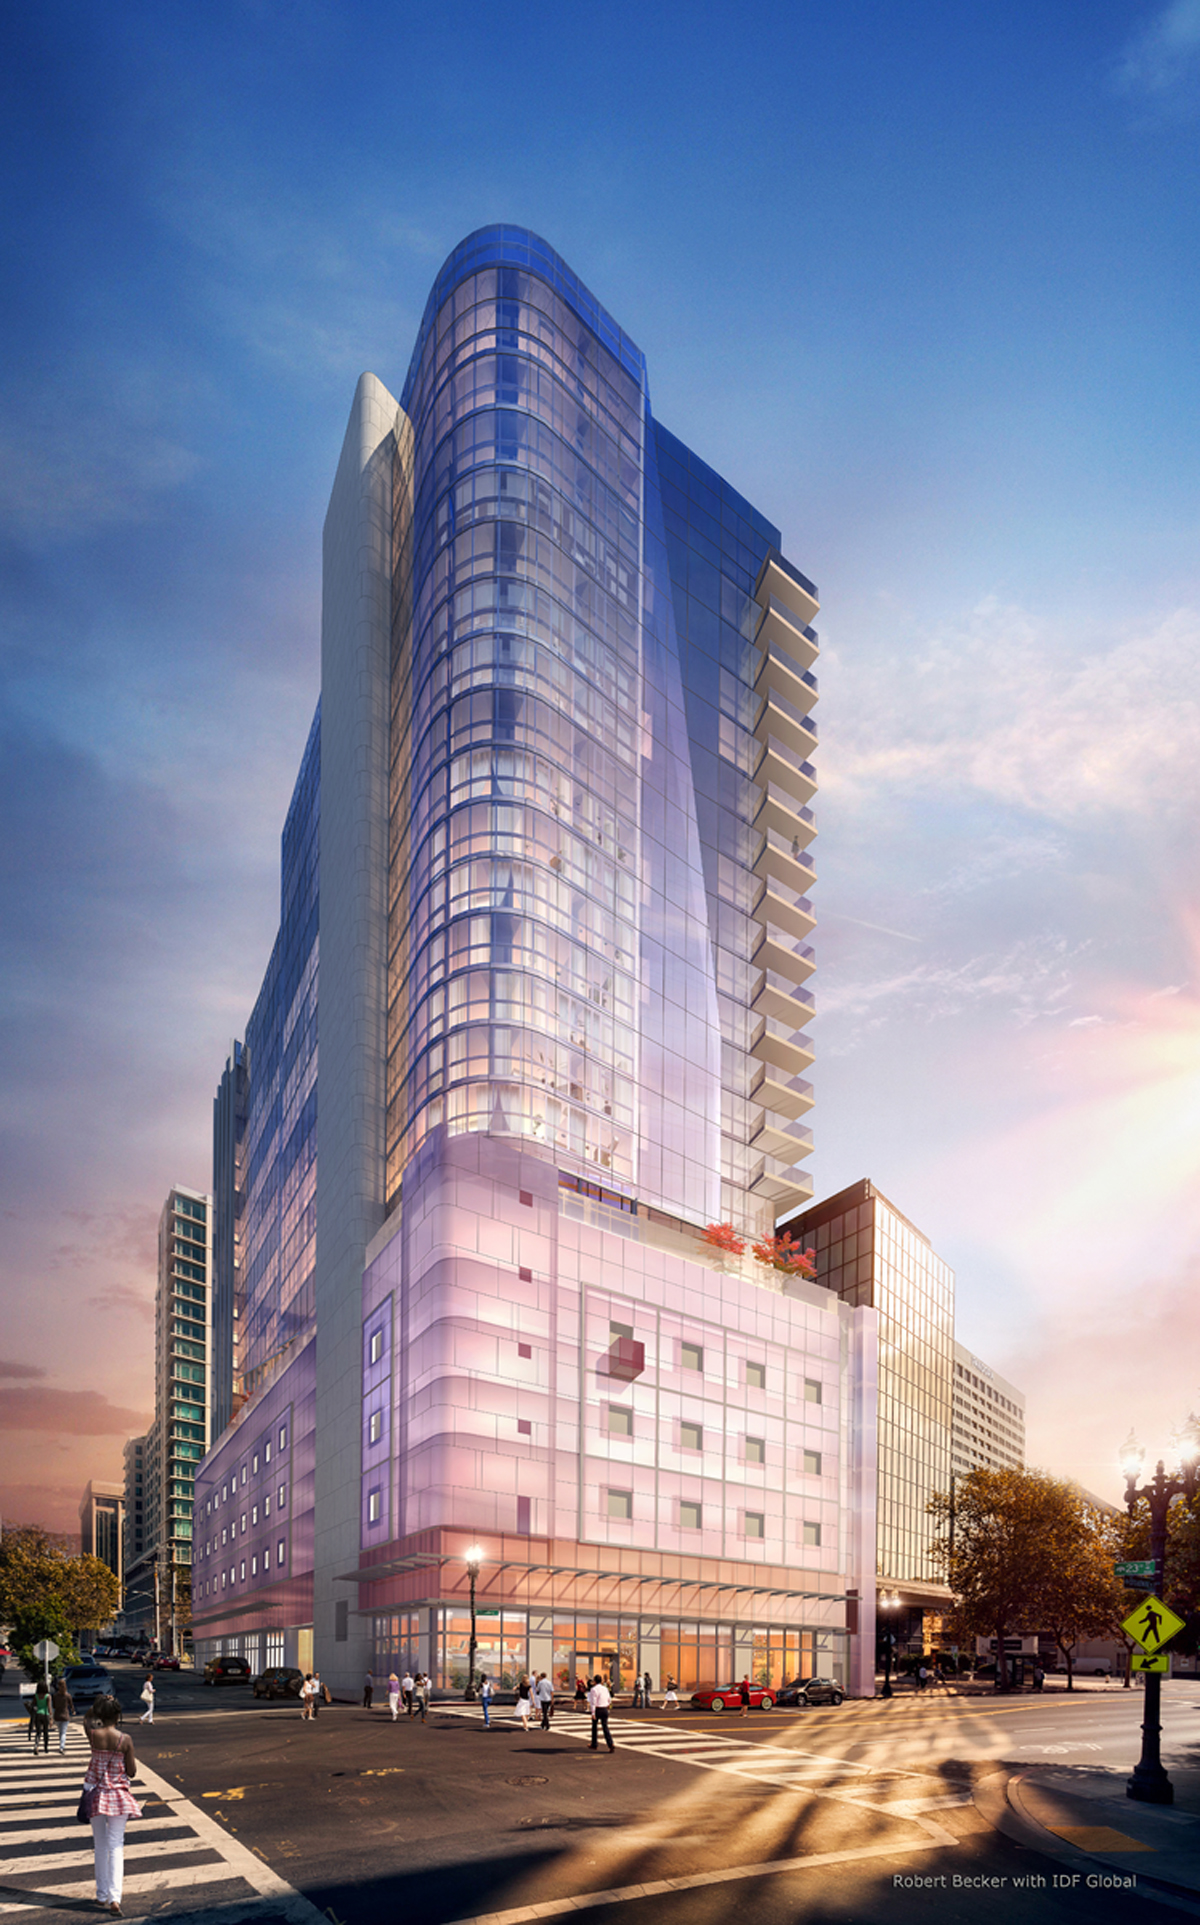 photorealistic high rise tower rendering photomontage